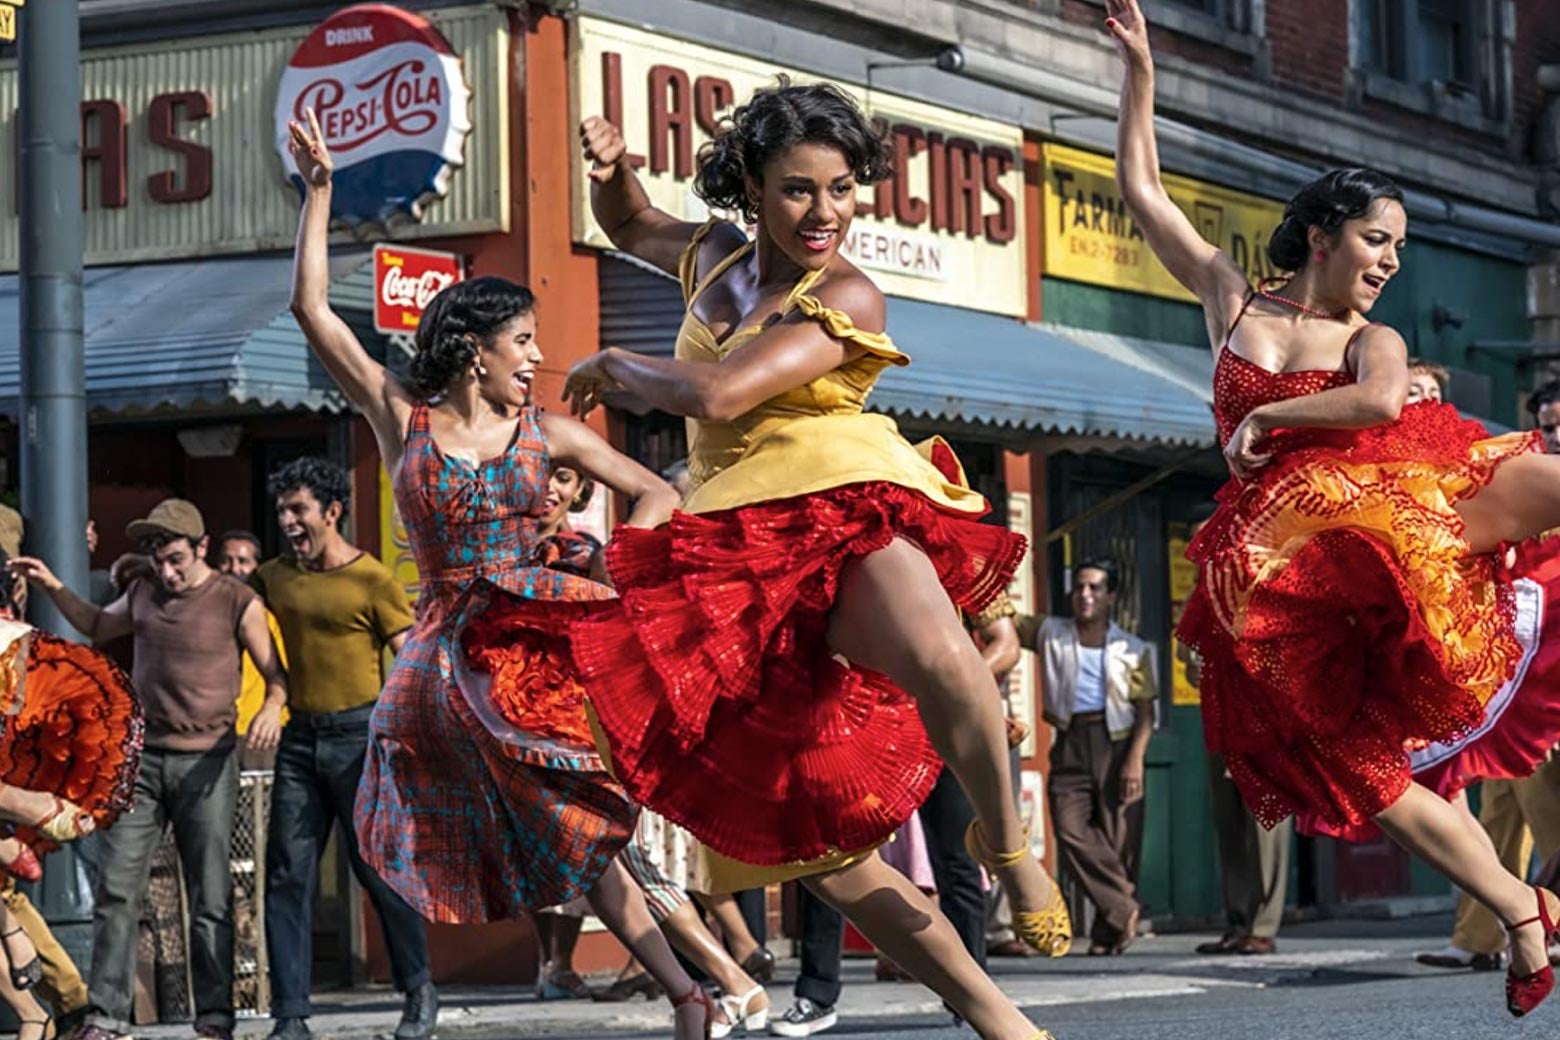 A still from the 2021 West Side Story of three women in colorful dresses dancing in a 1960s-era New York street